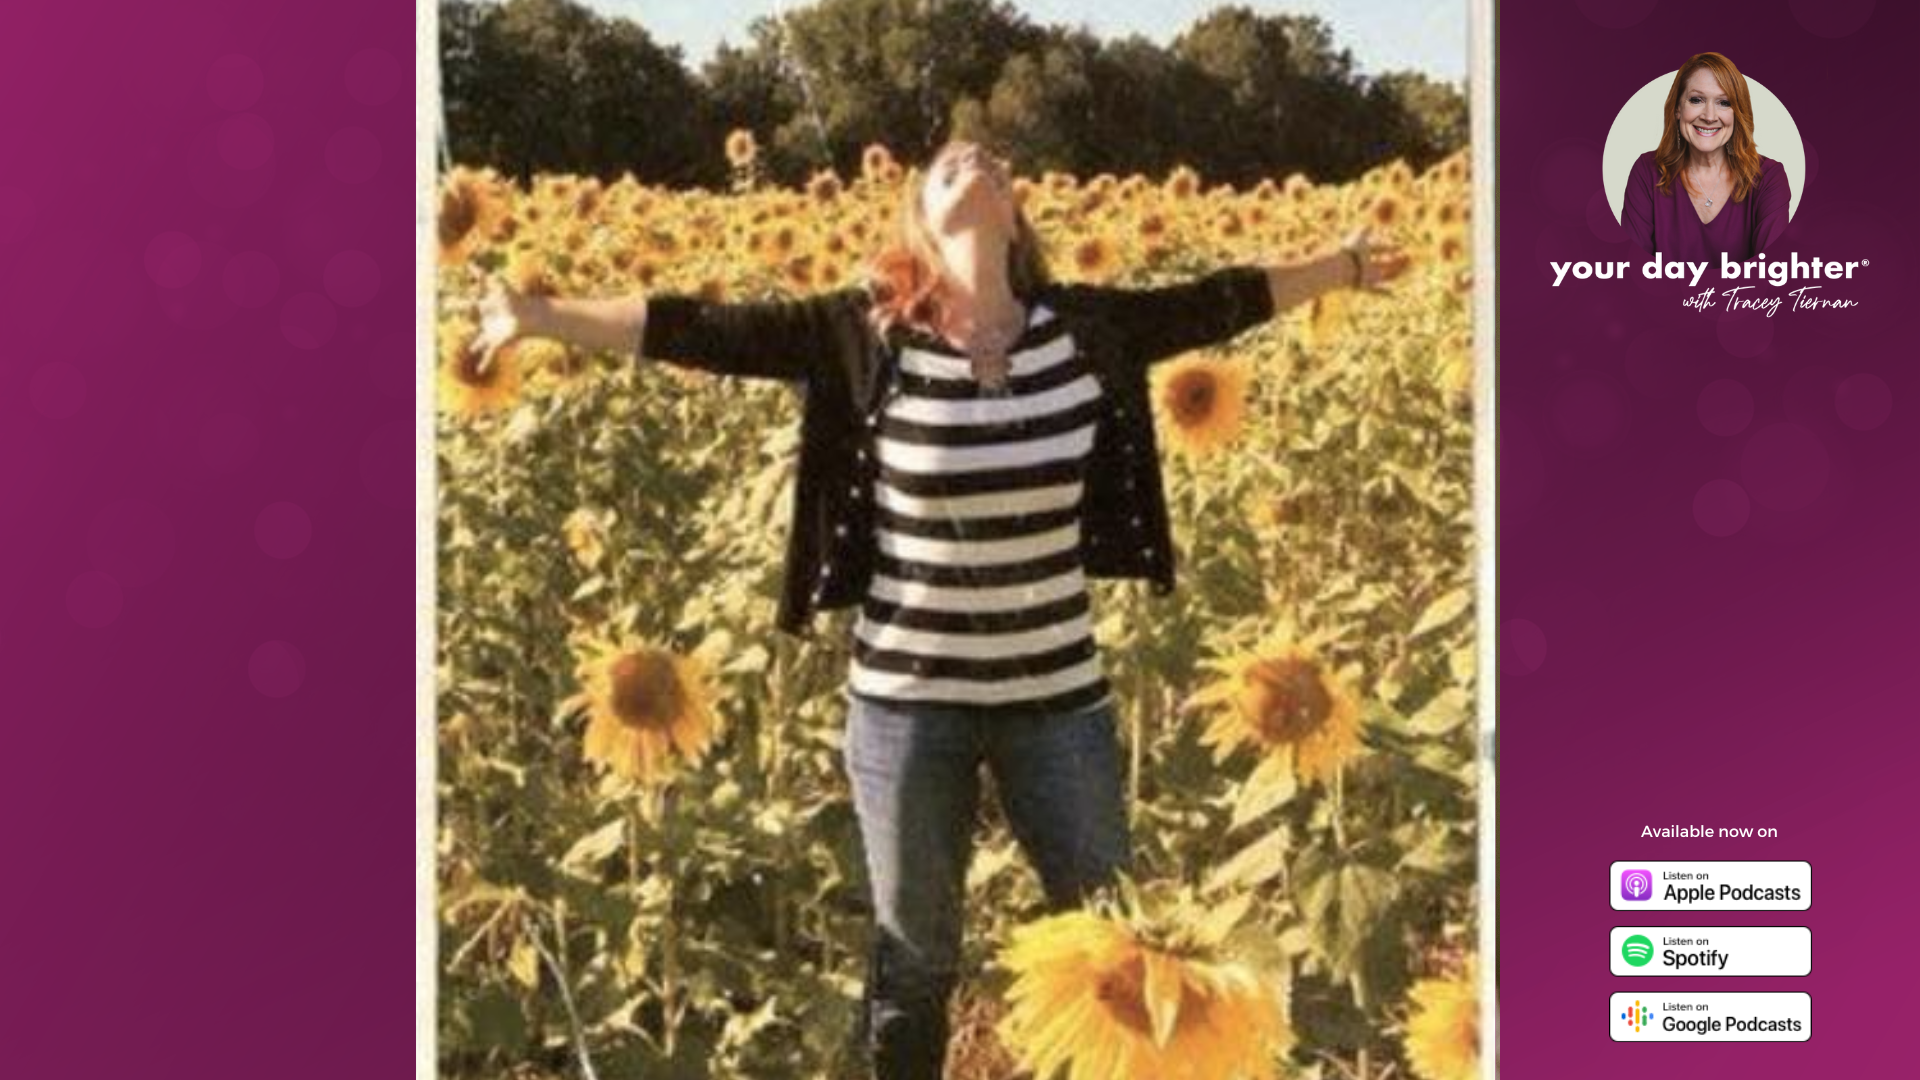 Tracey standing in a field of sunflowers with her arms outstretched as she smiles towards the sky